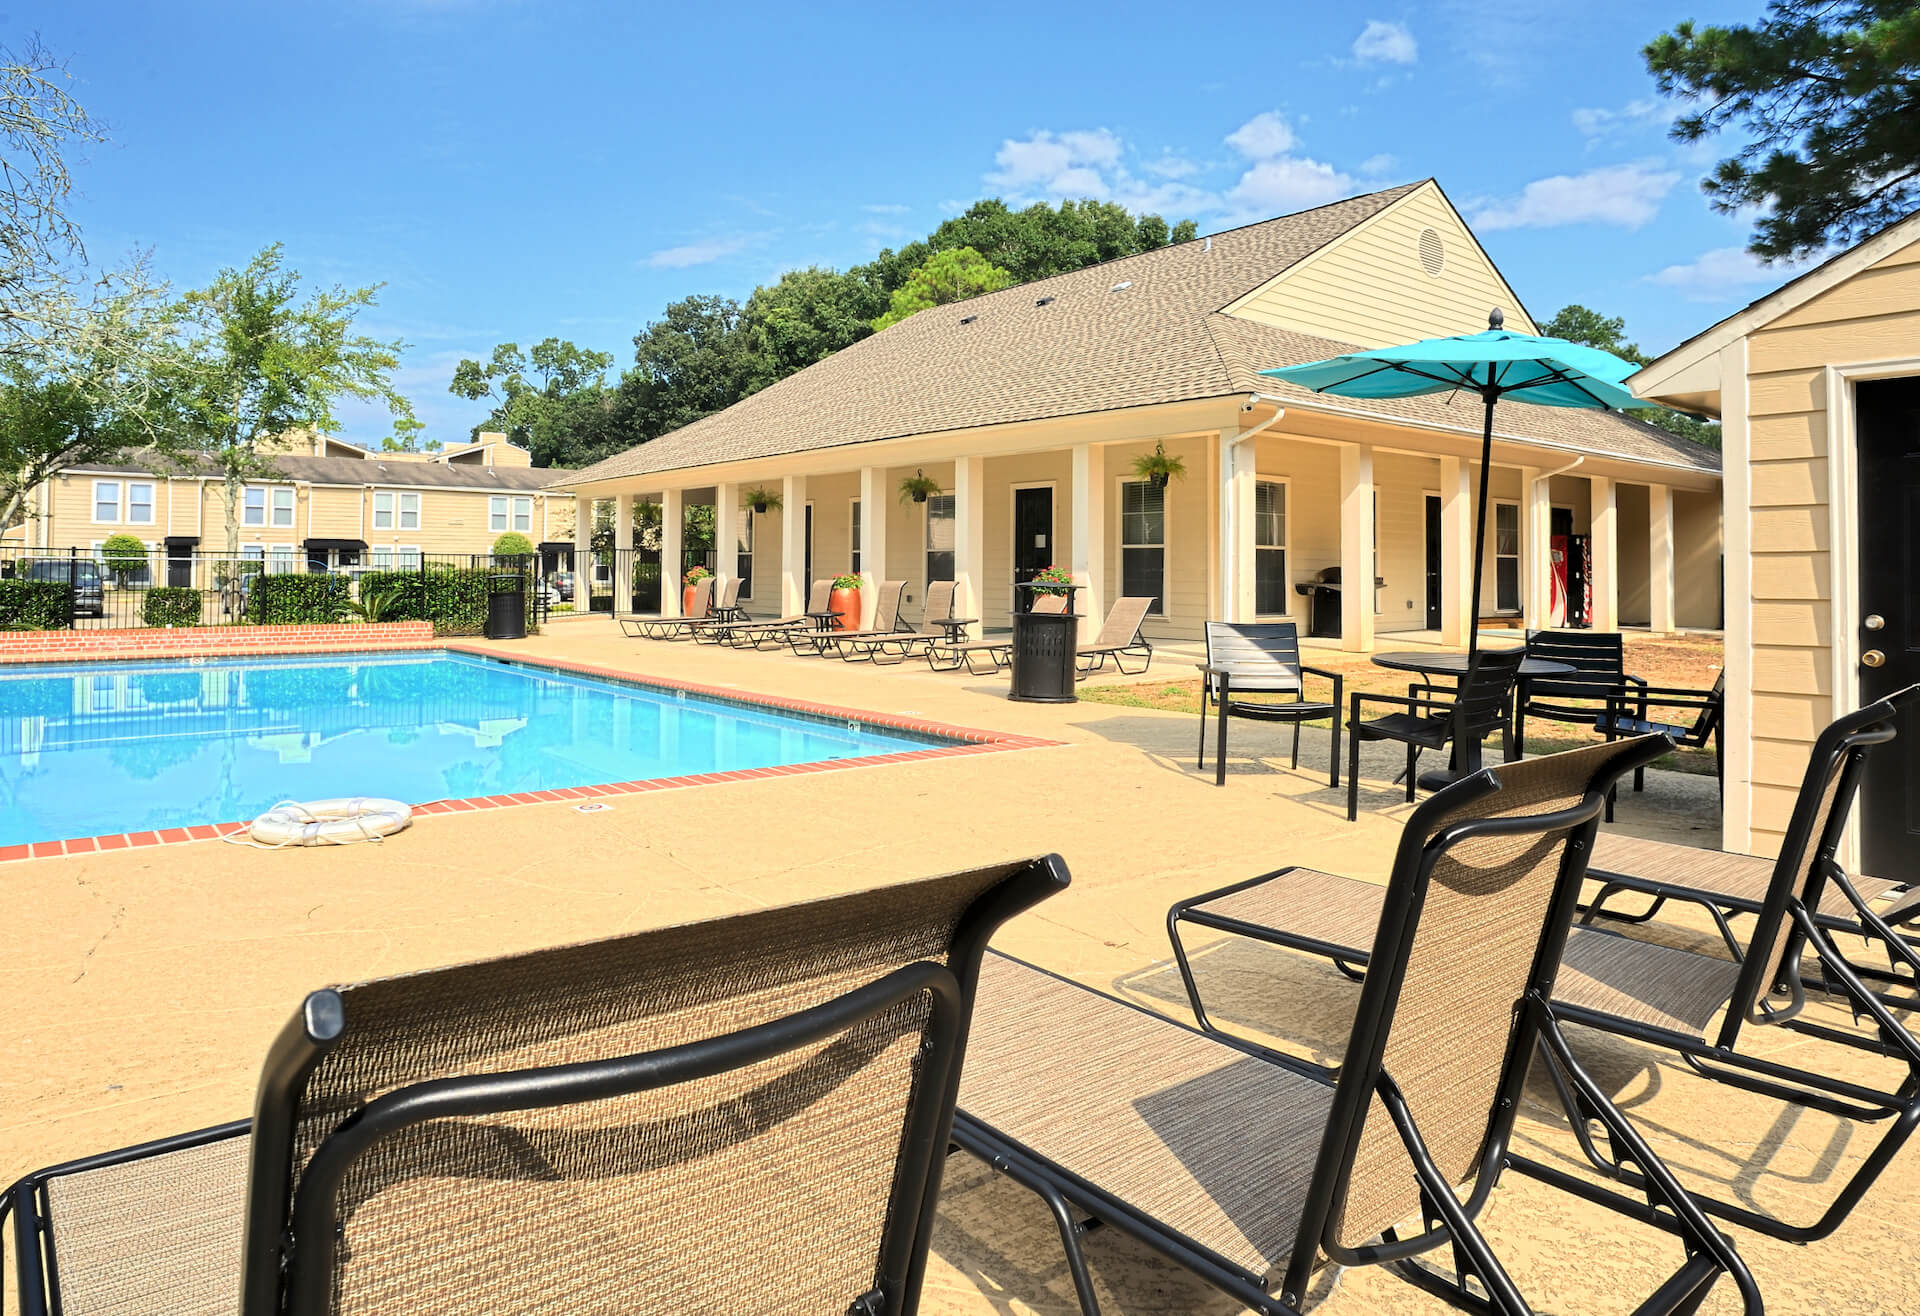 pool area at fairway view apartments